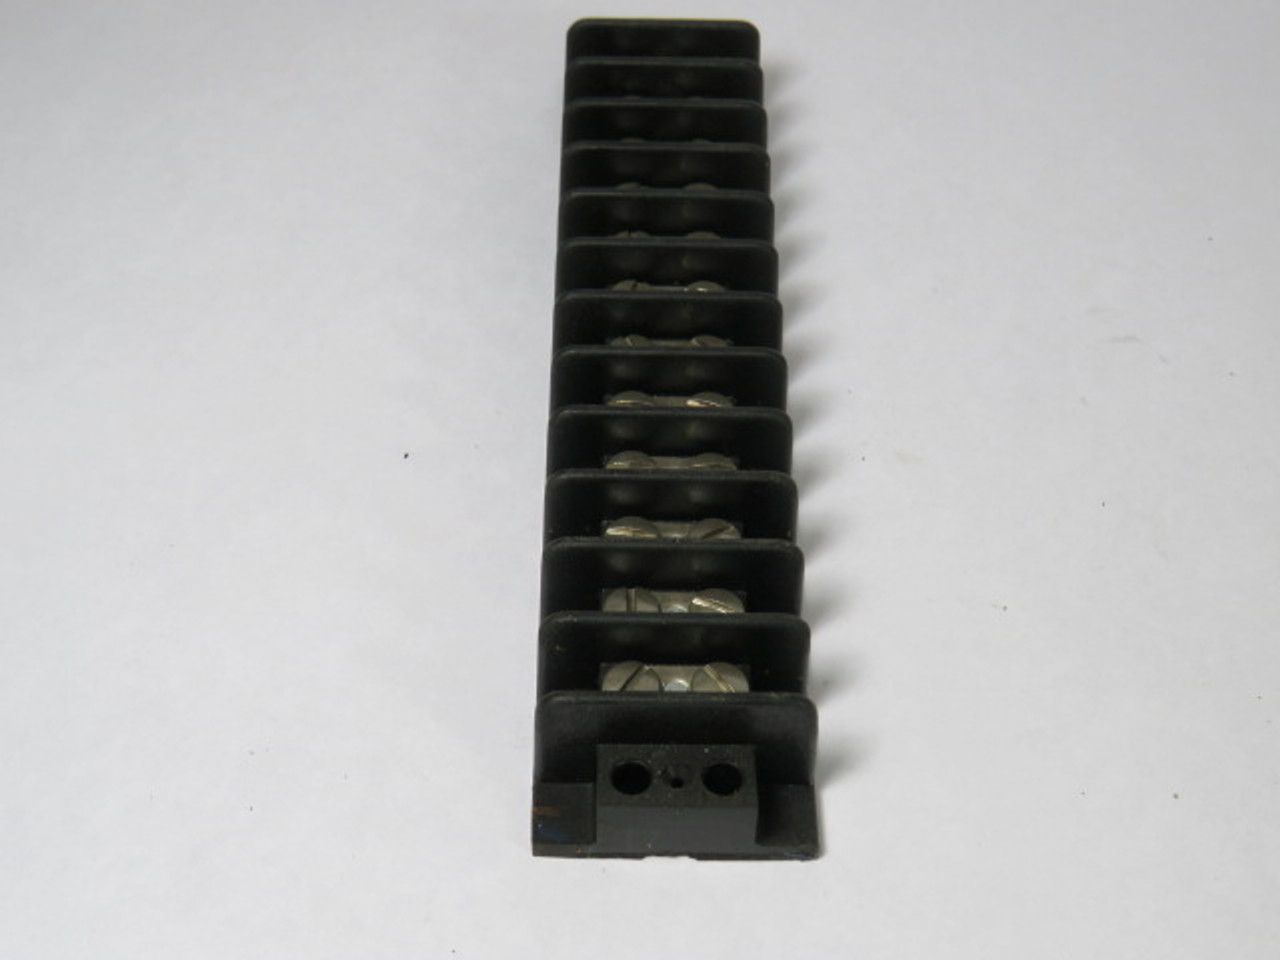 Cinch 12-141 Terminal Barrier Block 12-Position Double Row USED